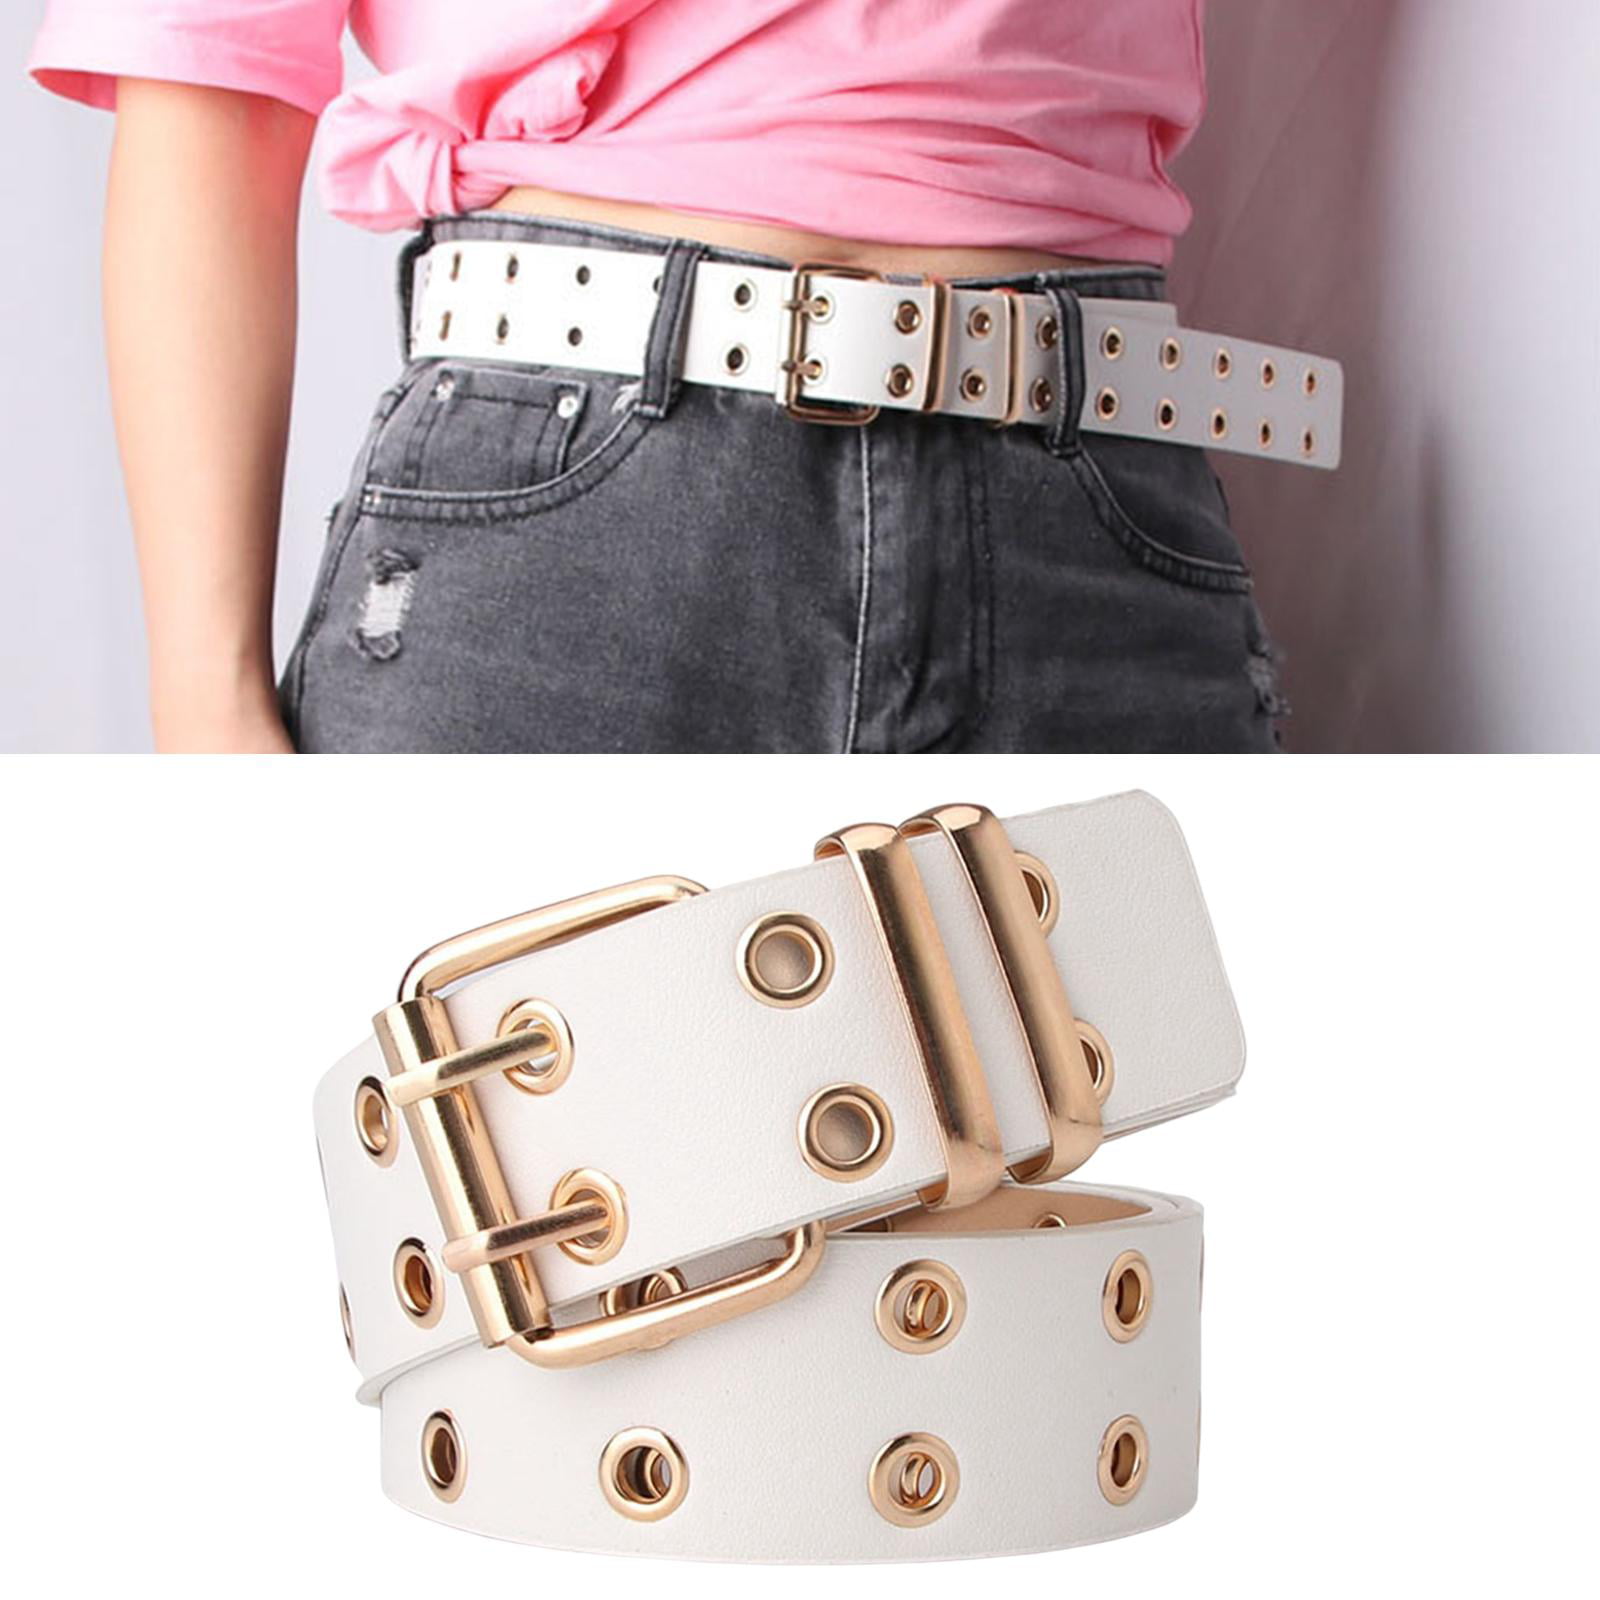 Vintage Belt, Eyelet Fashion White Adjustable PU Hollow Jeans. , Leather Double Gothic for Grommet Accessories, Punk Pants with